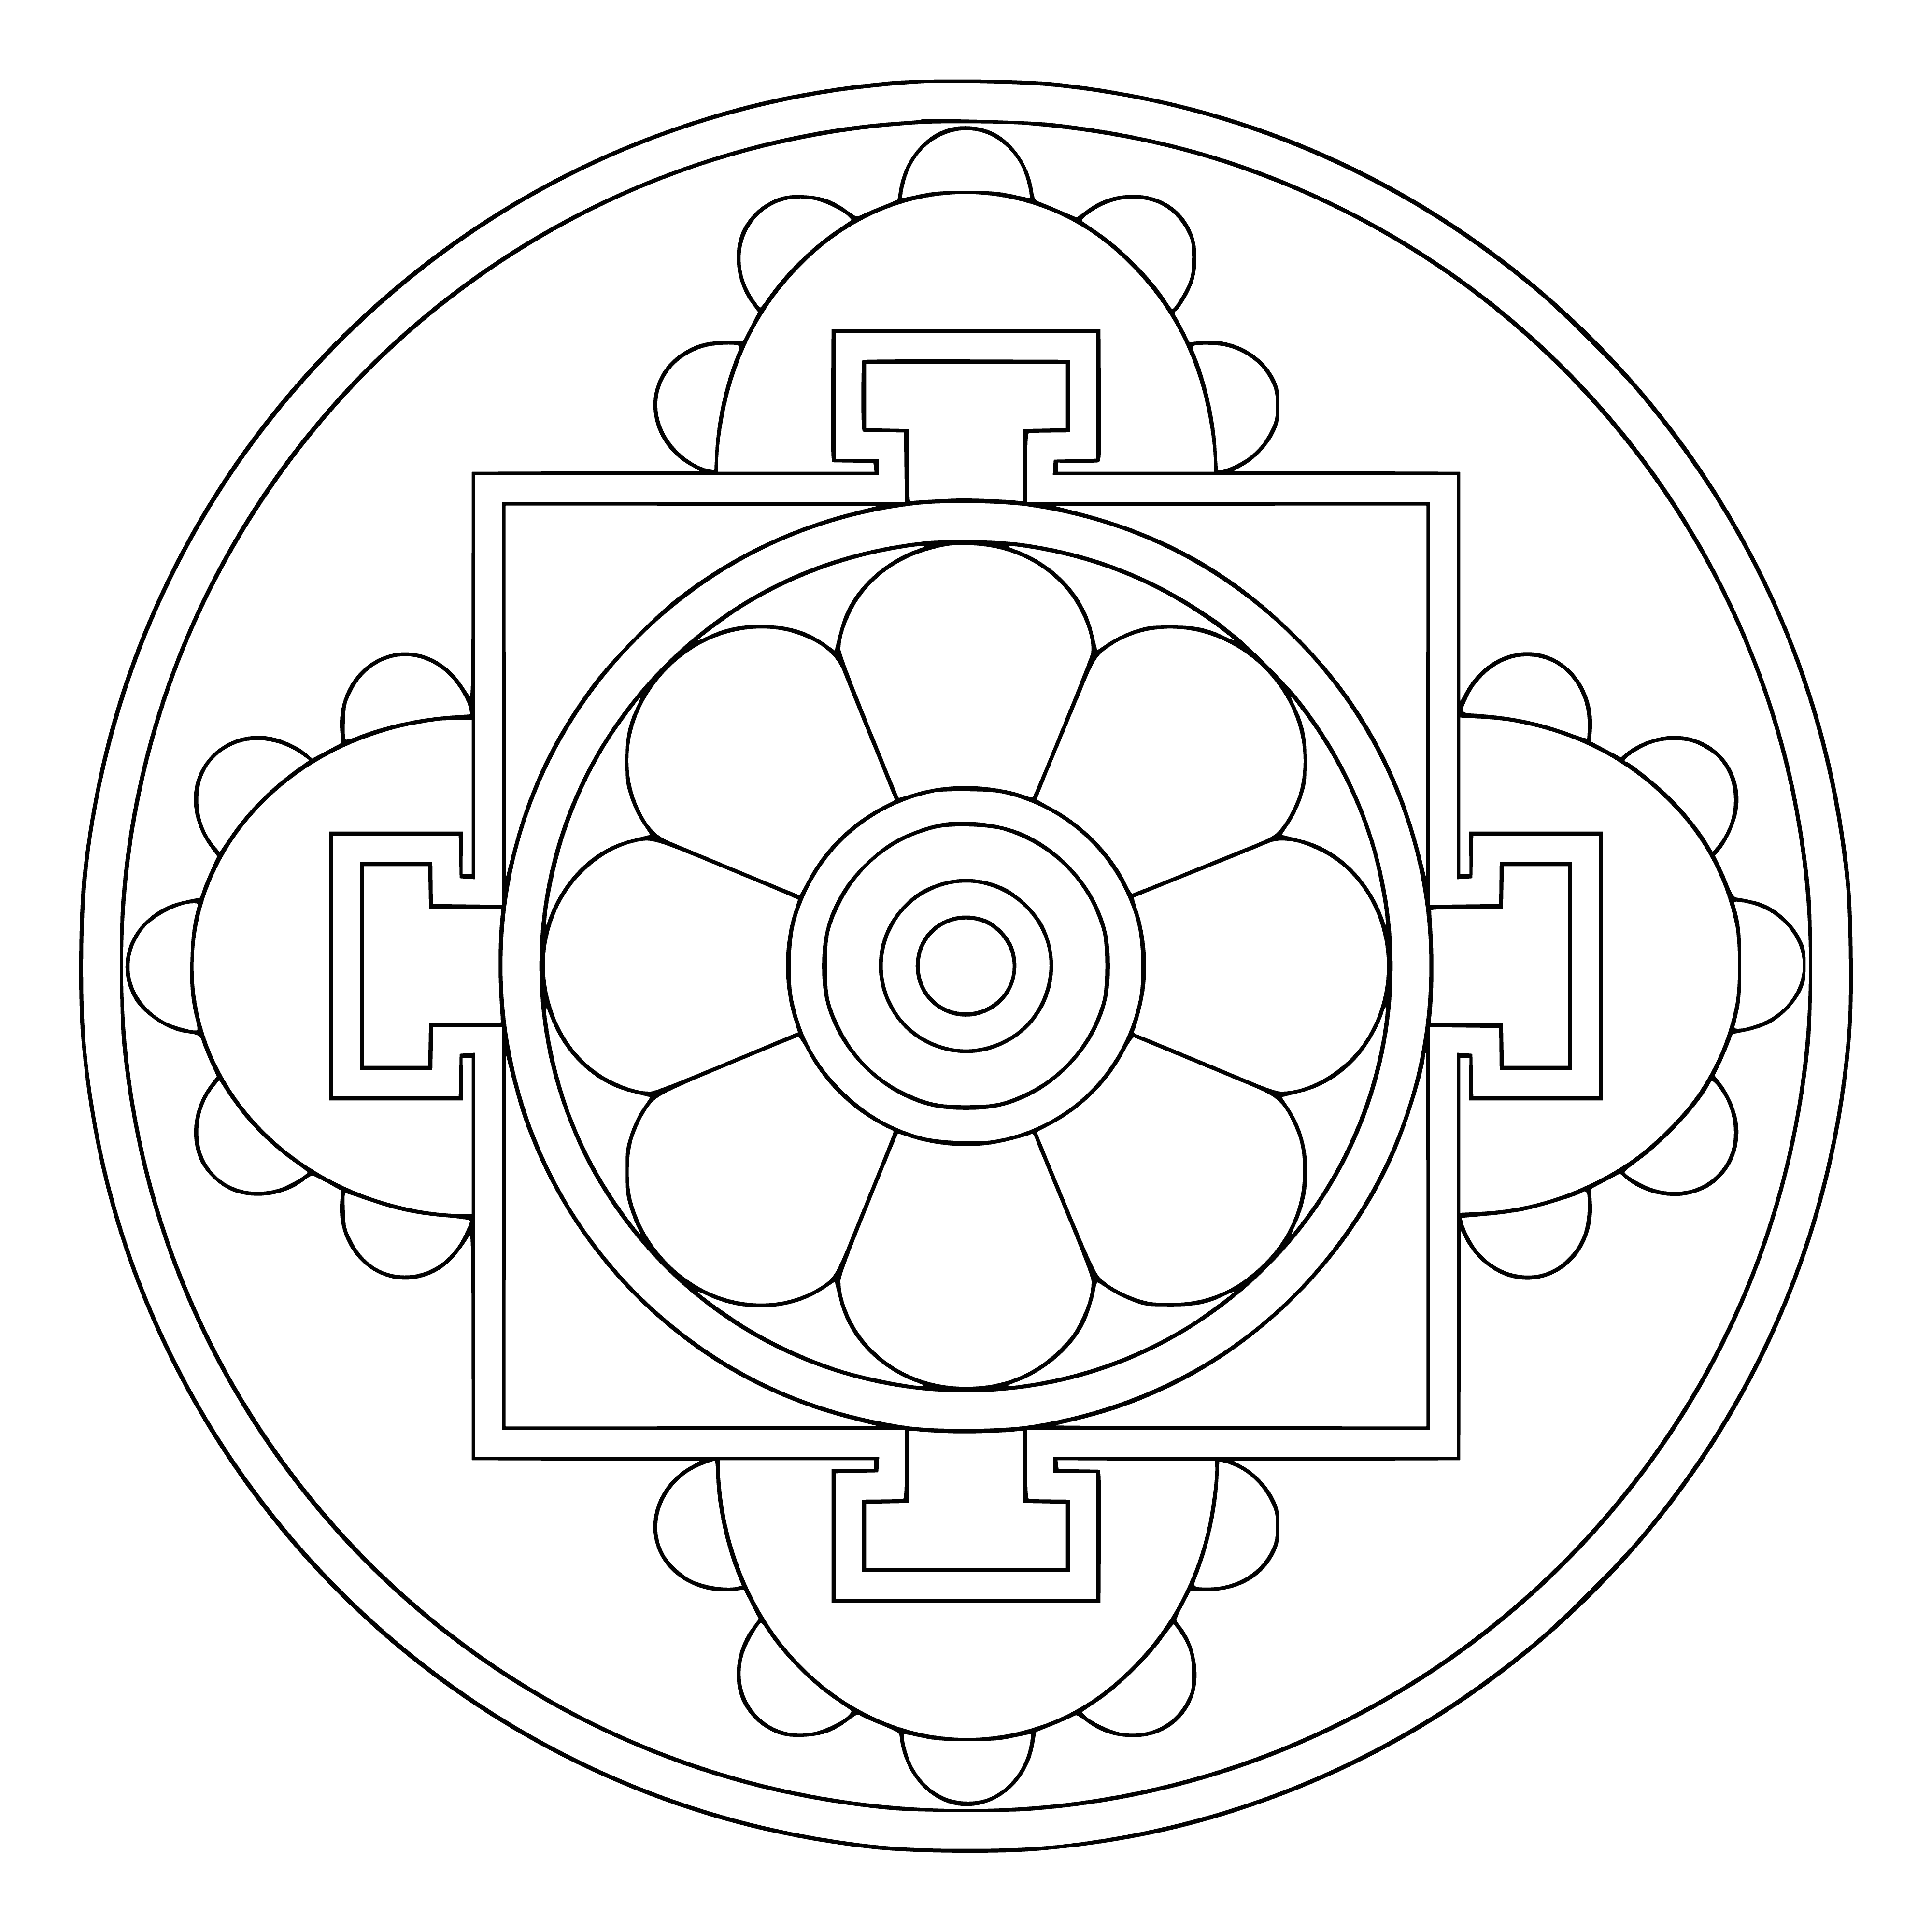 coloring page: A Tibetan mandala is an intricate circular diagram used in meditation and mindfulness. Coloring pages of gods, animals, and symbols are used to achieve a focused state.